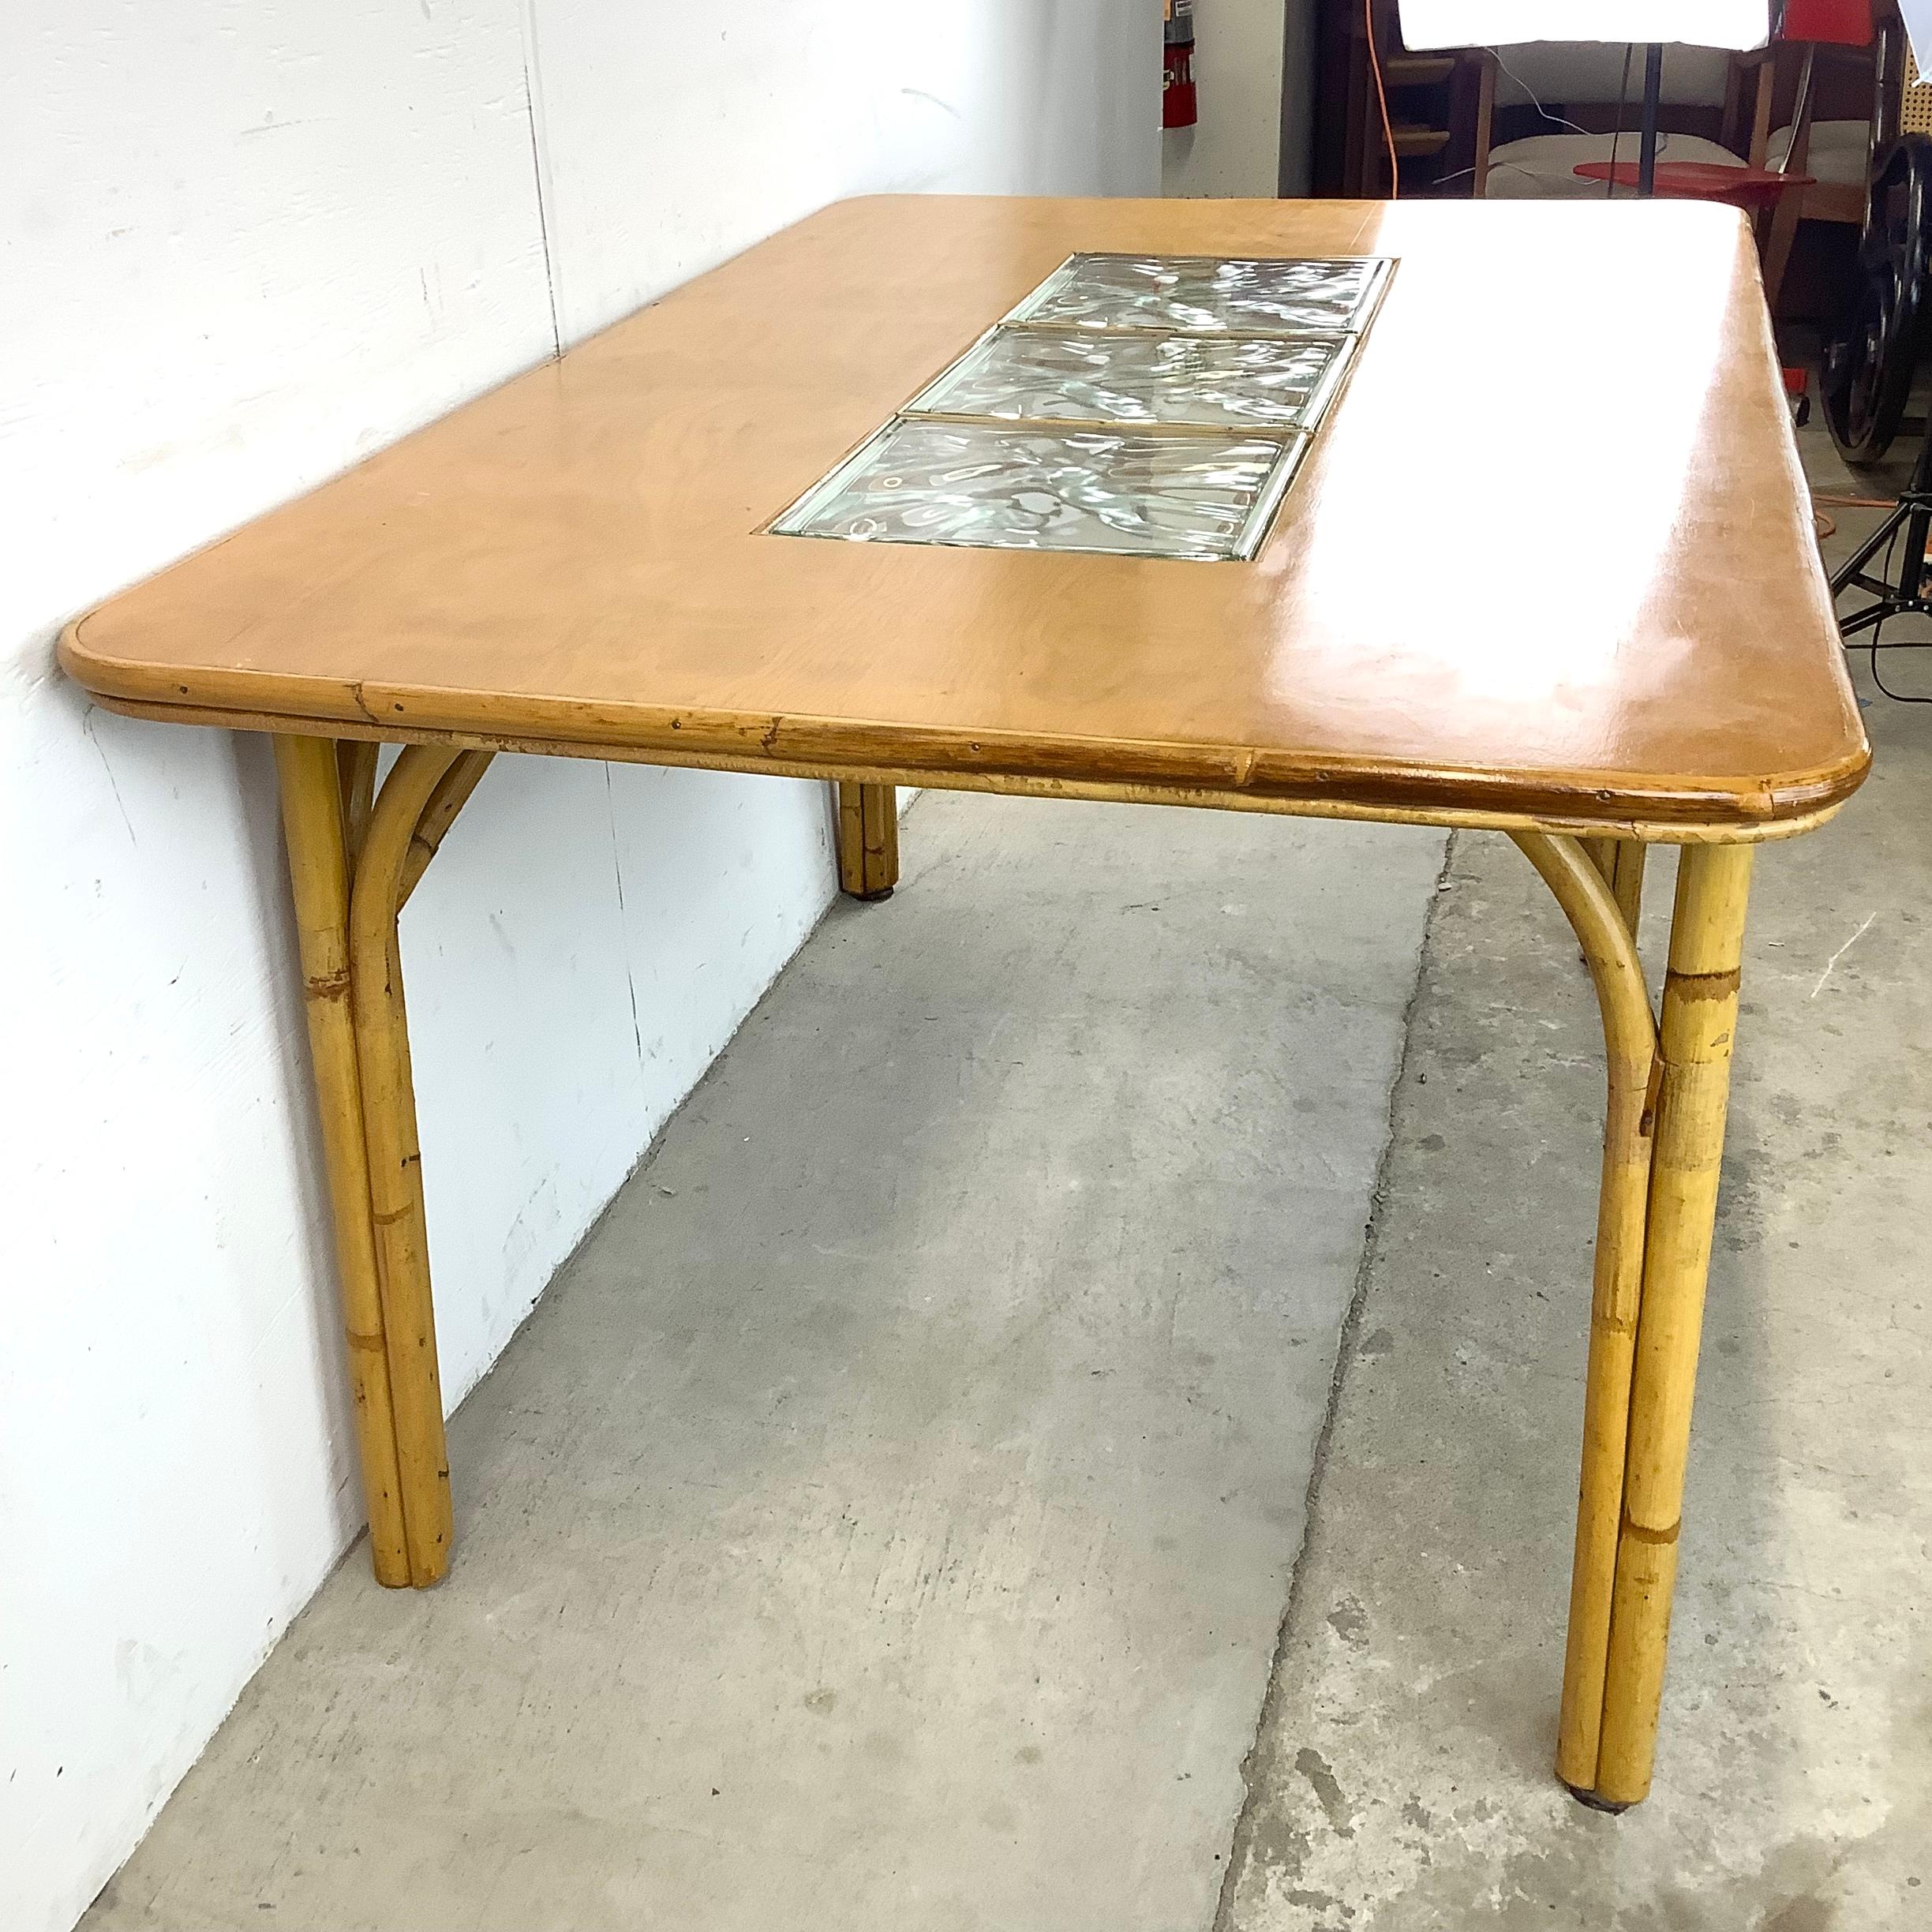 Unknown Vintage Modern Bamboo Dining Table With Glass Inserts For Sale